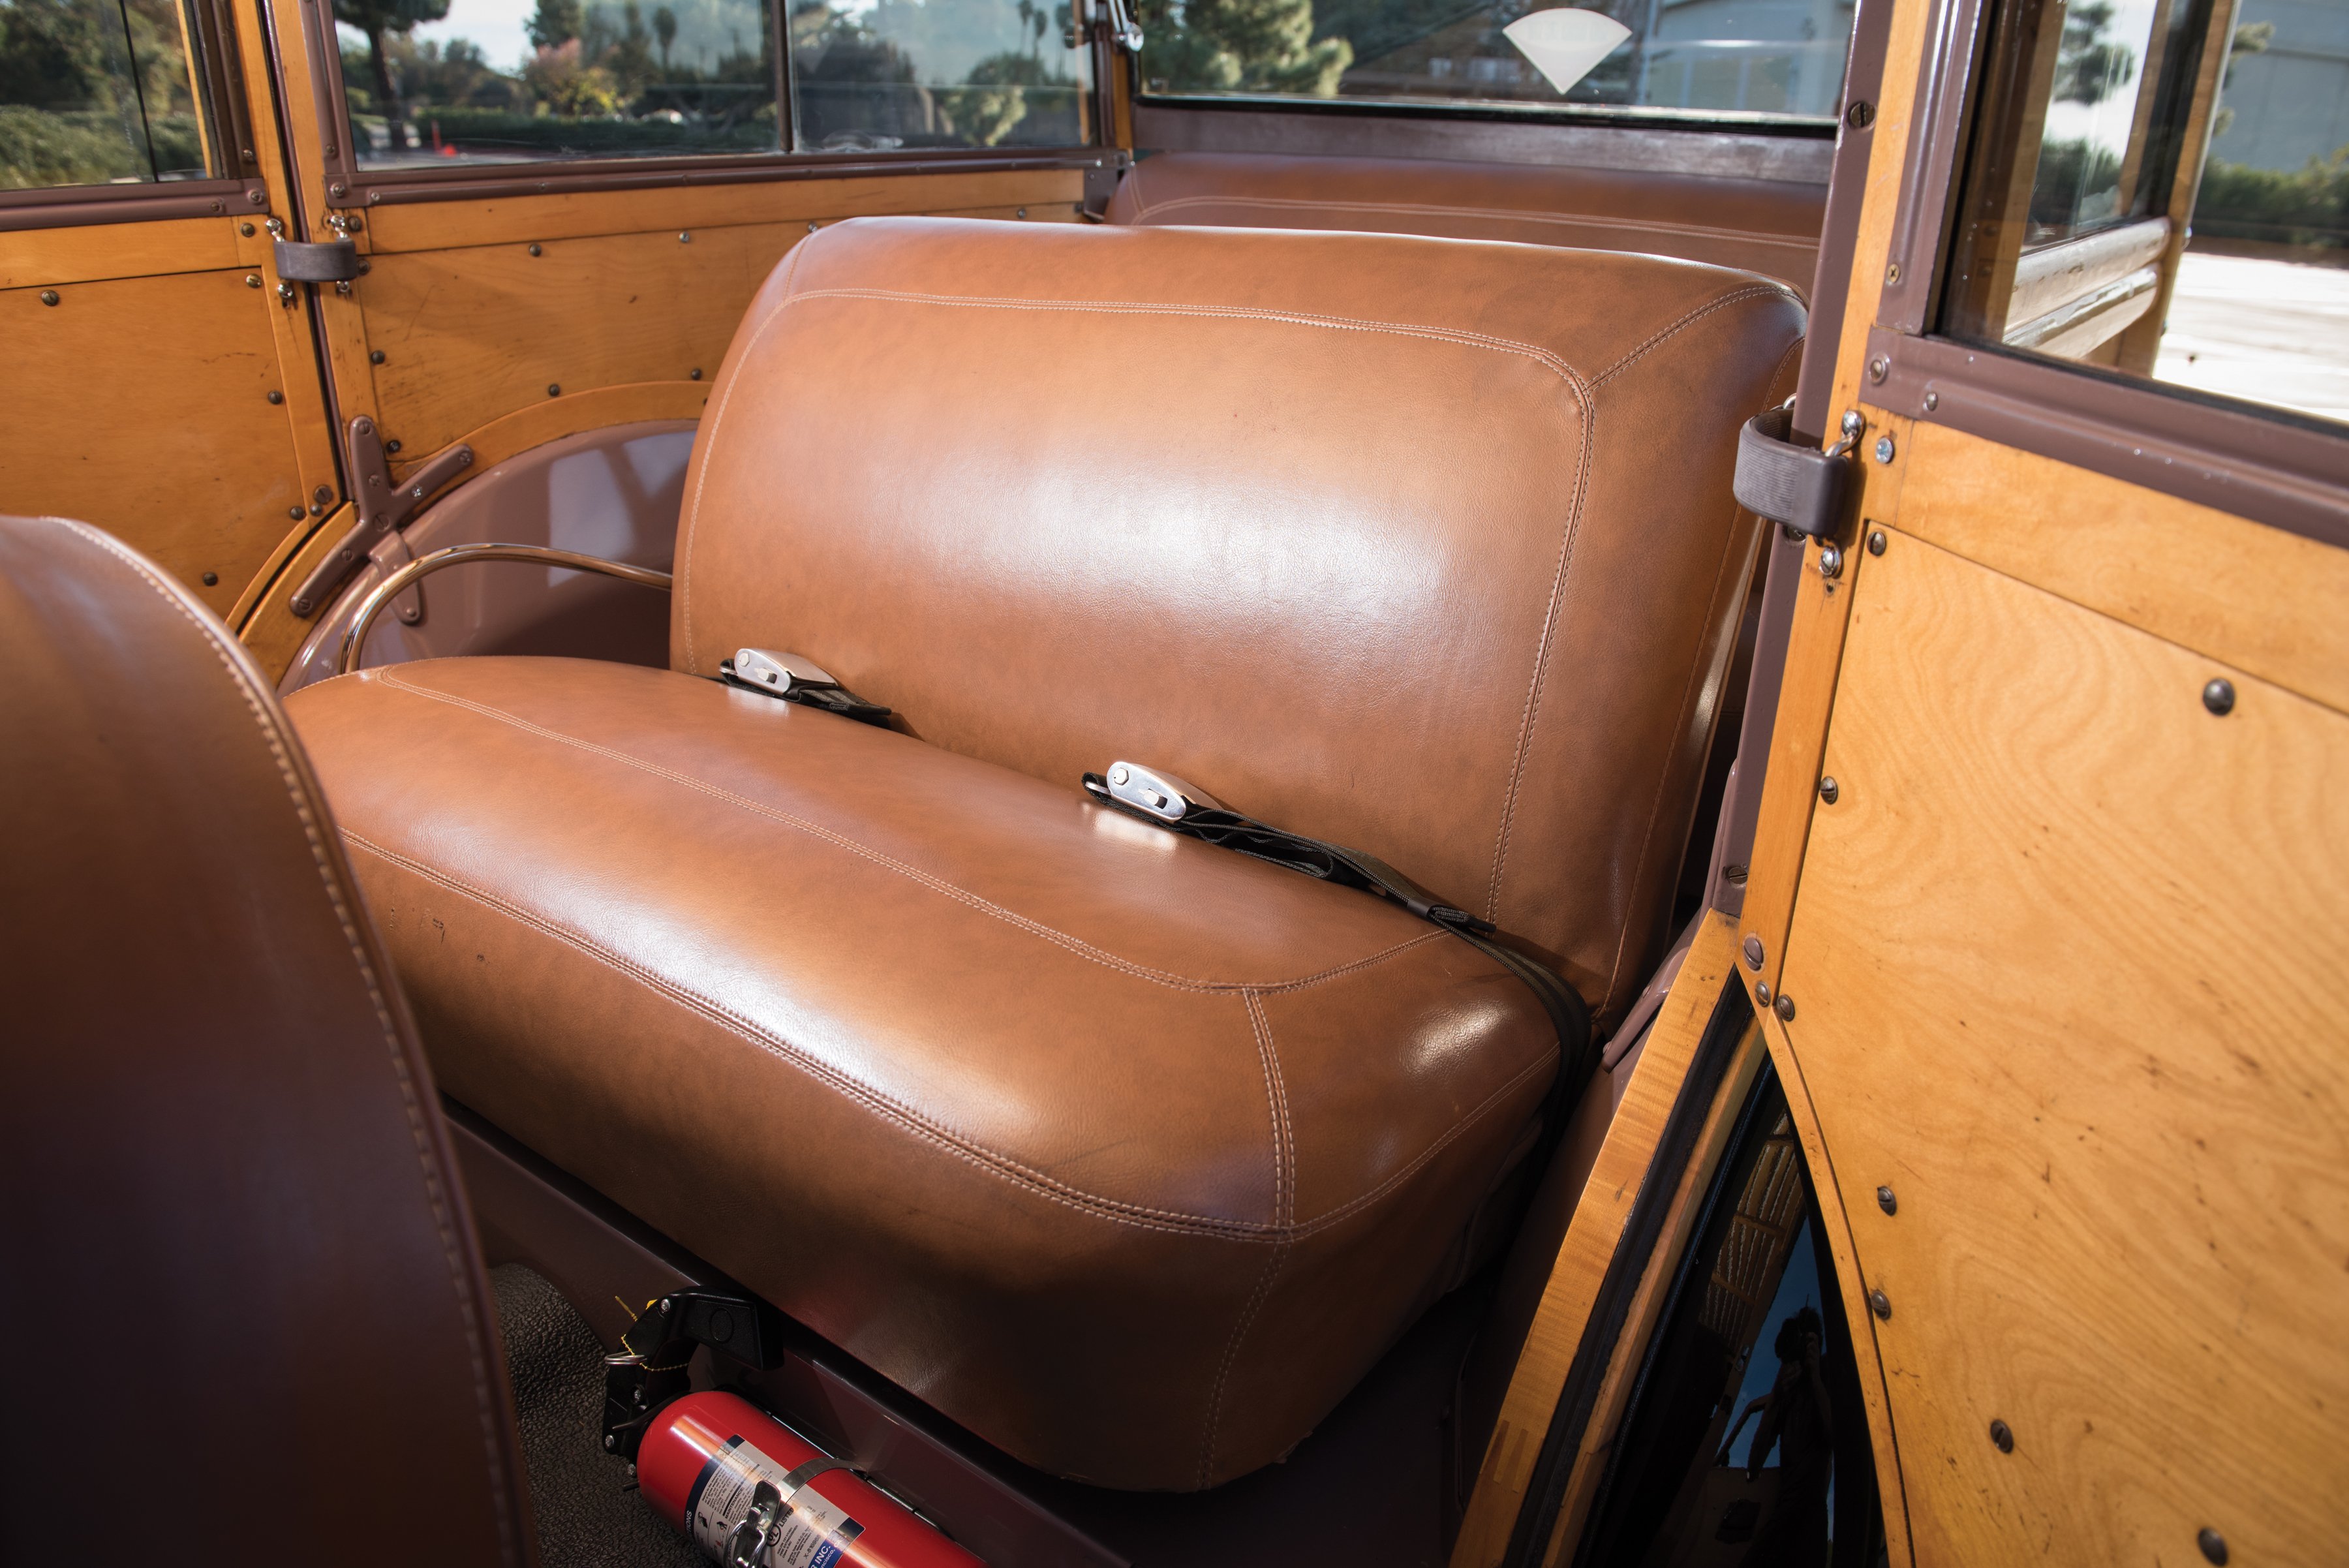 1939, Ford, V 8, Deluxe, Stationwagon, 91a 79, Woody, Retro, Vintage Wallpaper